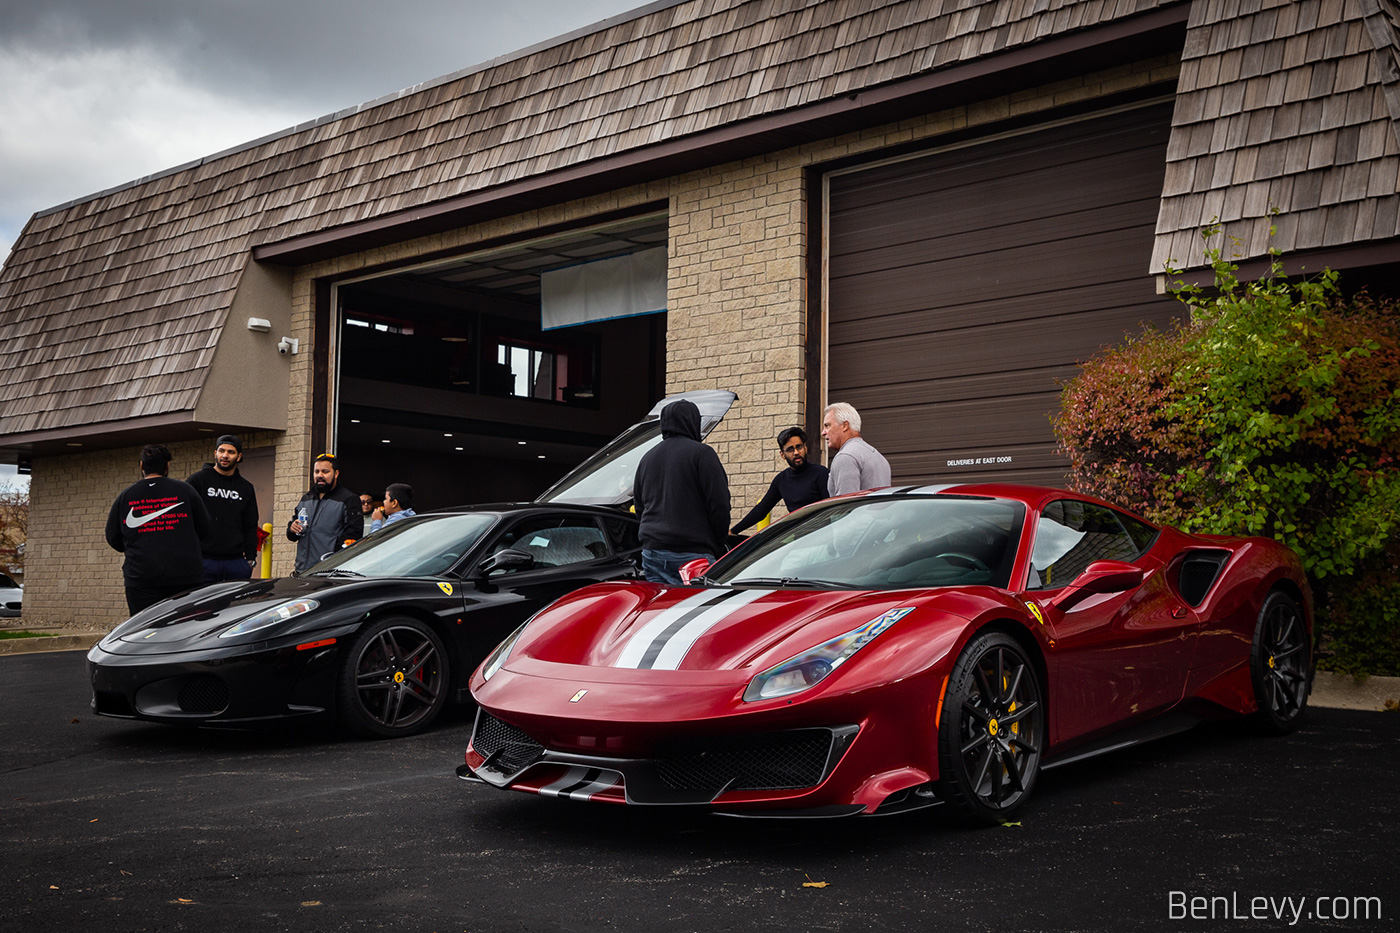 Ferrari F430 and 488 Pista outside of Executive Motor Carz in Lake Forest